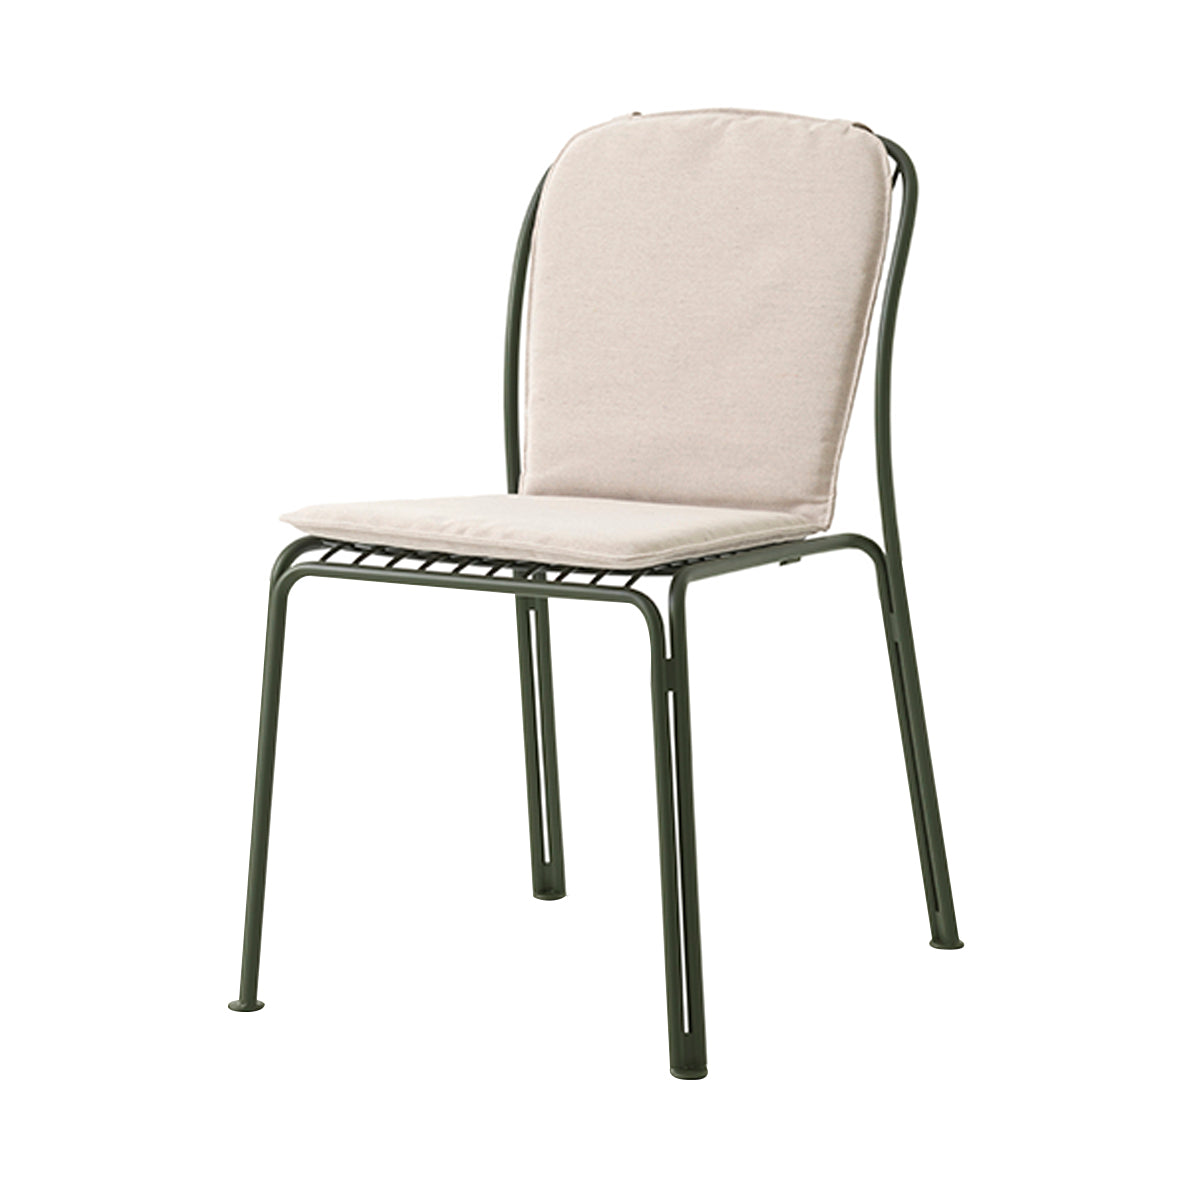 Thorvald SC94 Side Chair: Outdoor + Bronze Green + With Heritage Papyrus Cushion